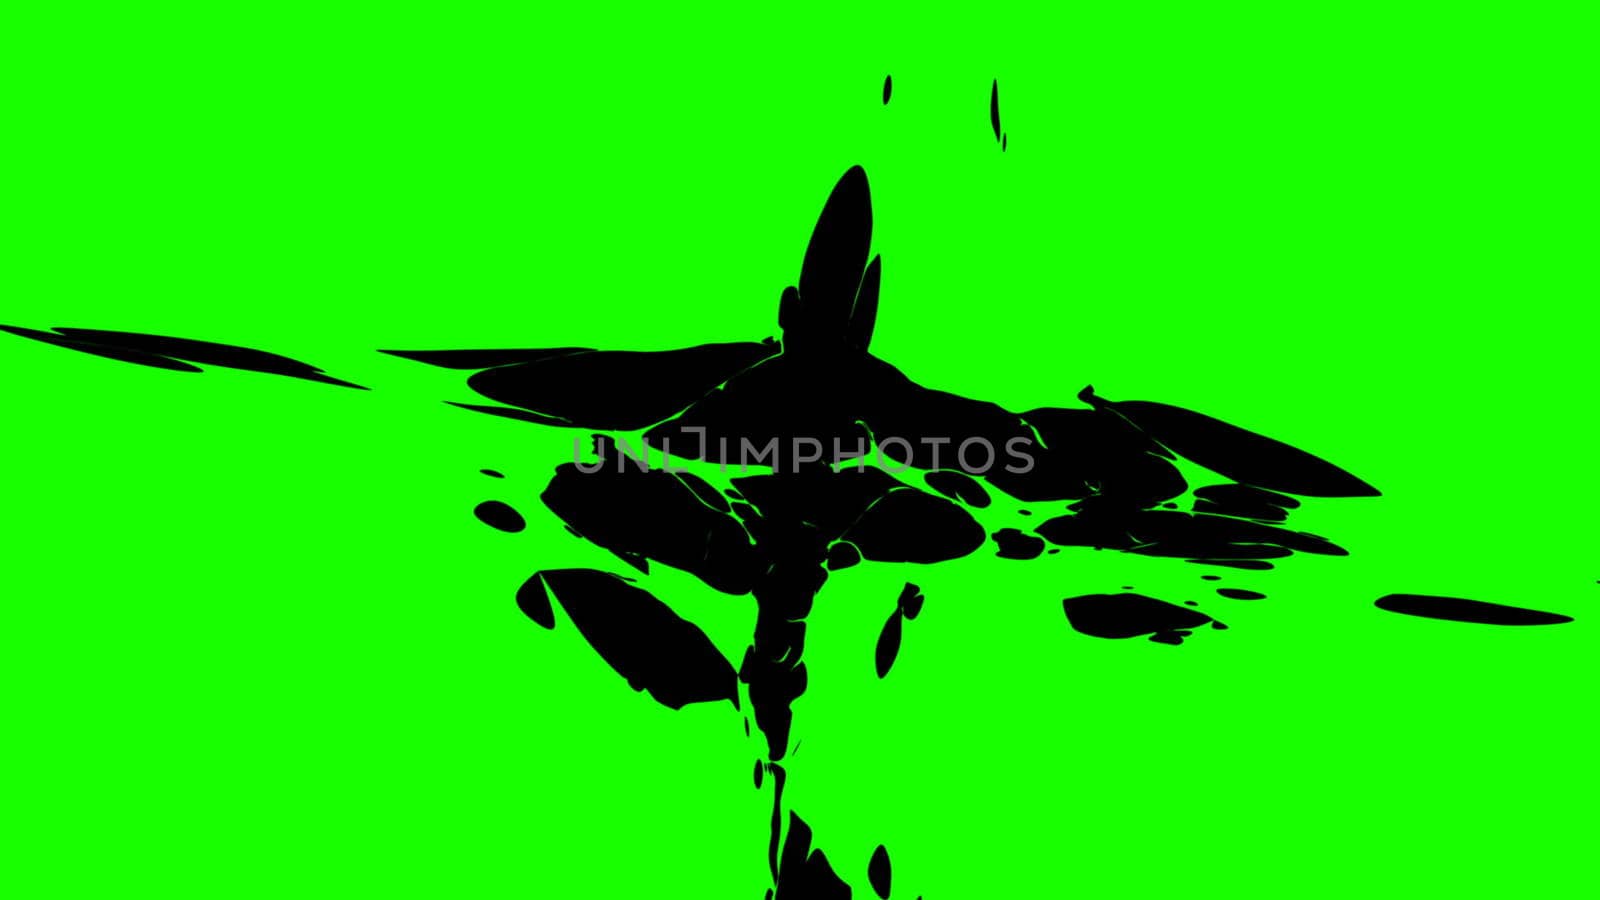 Tear transition. Green screen. Transparent background. Green and white